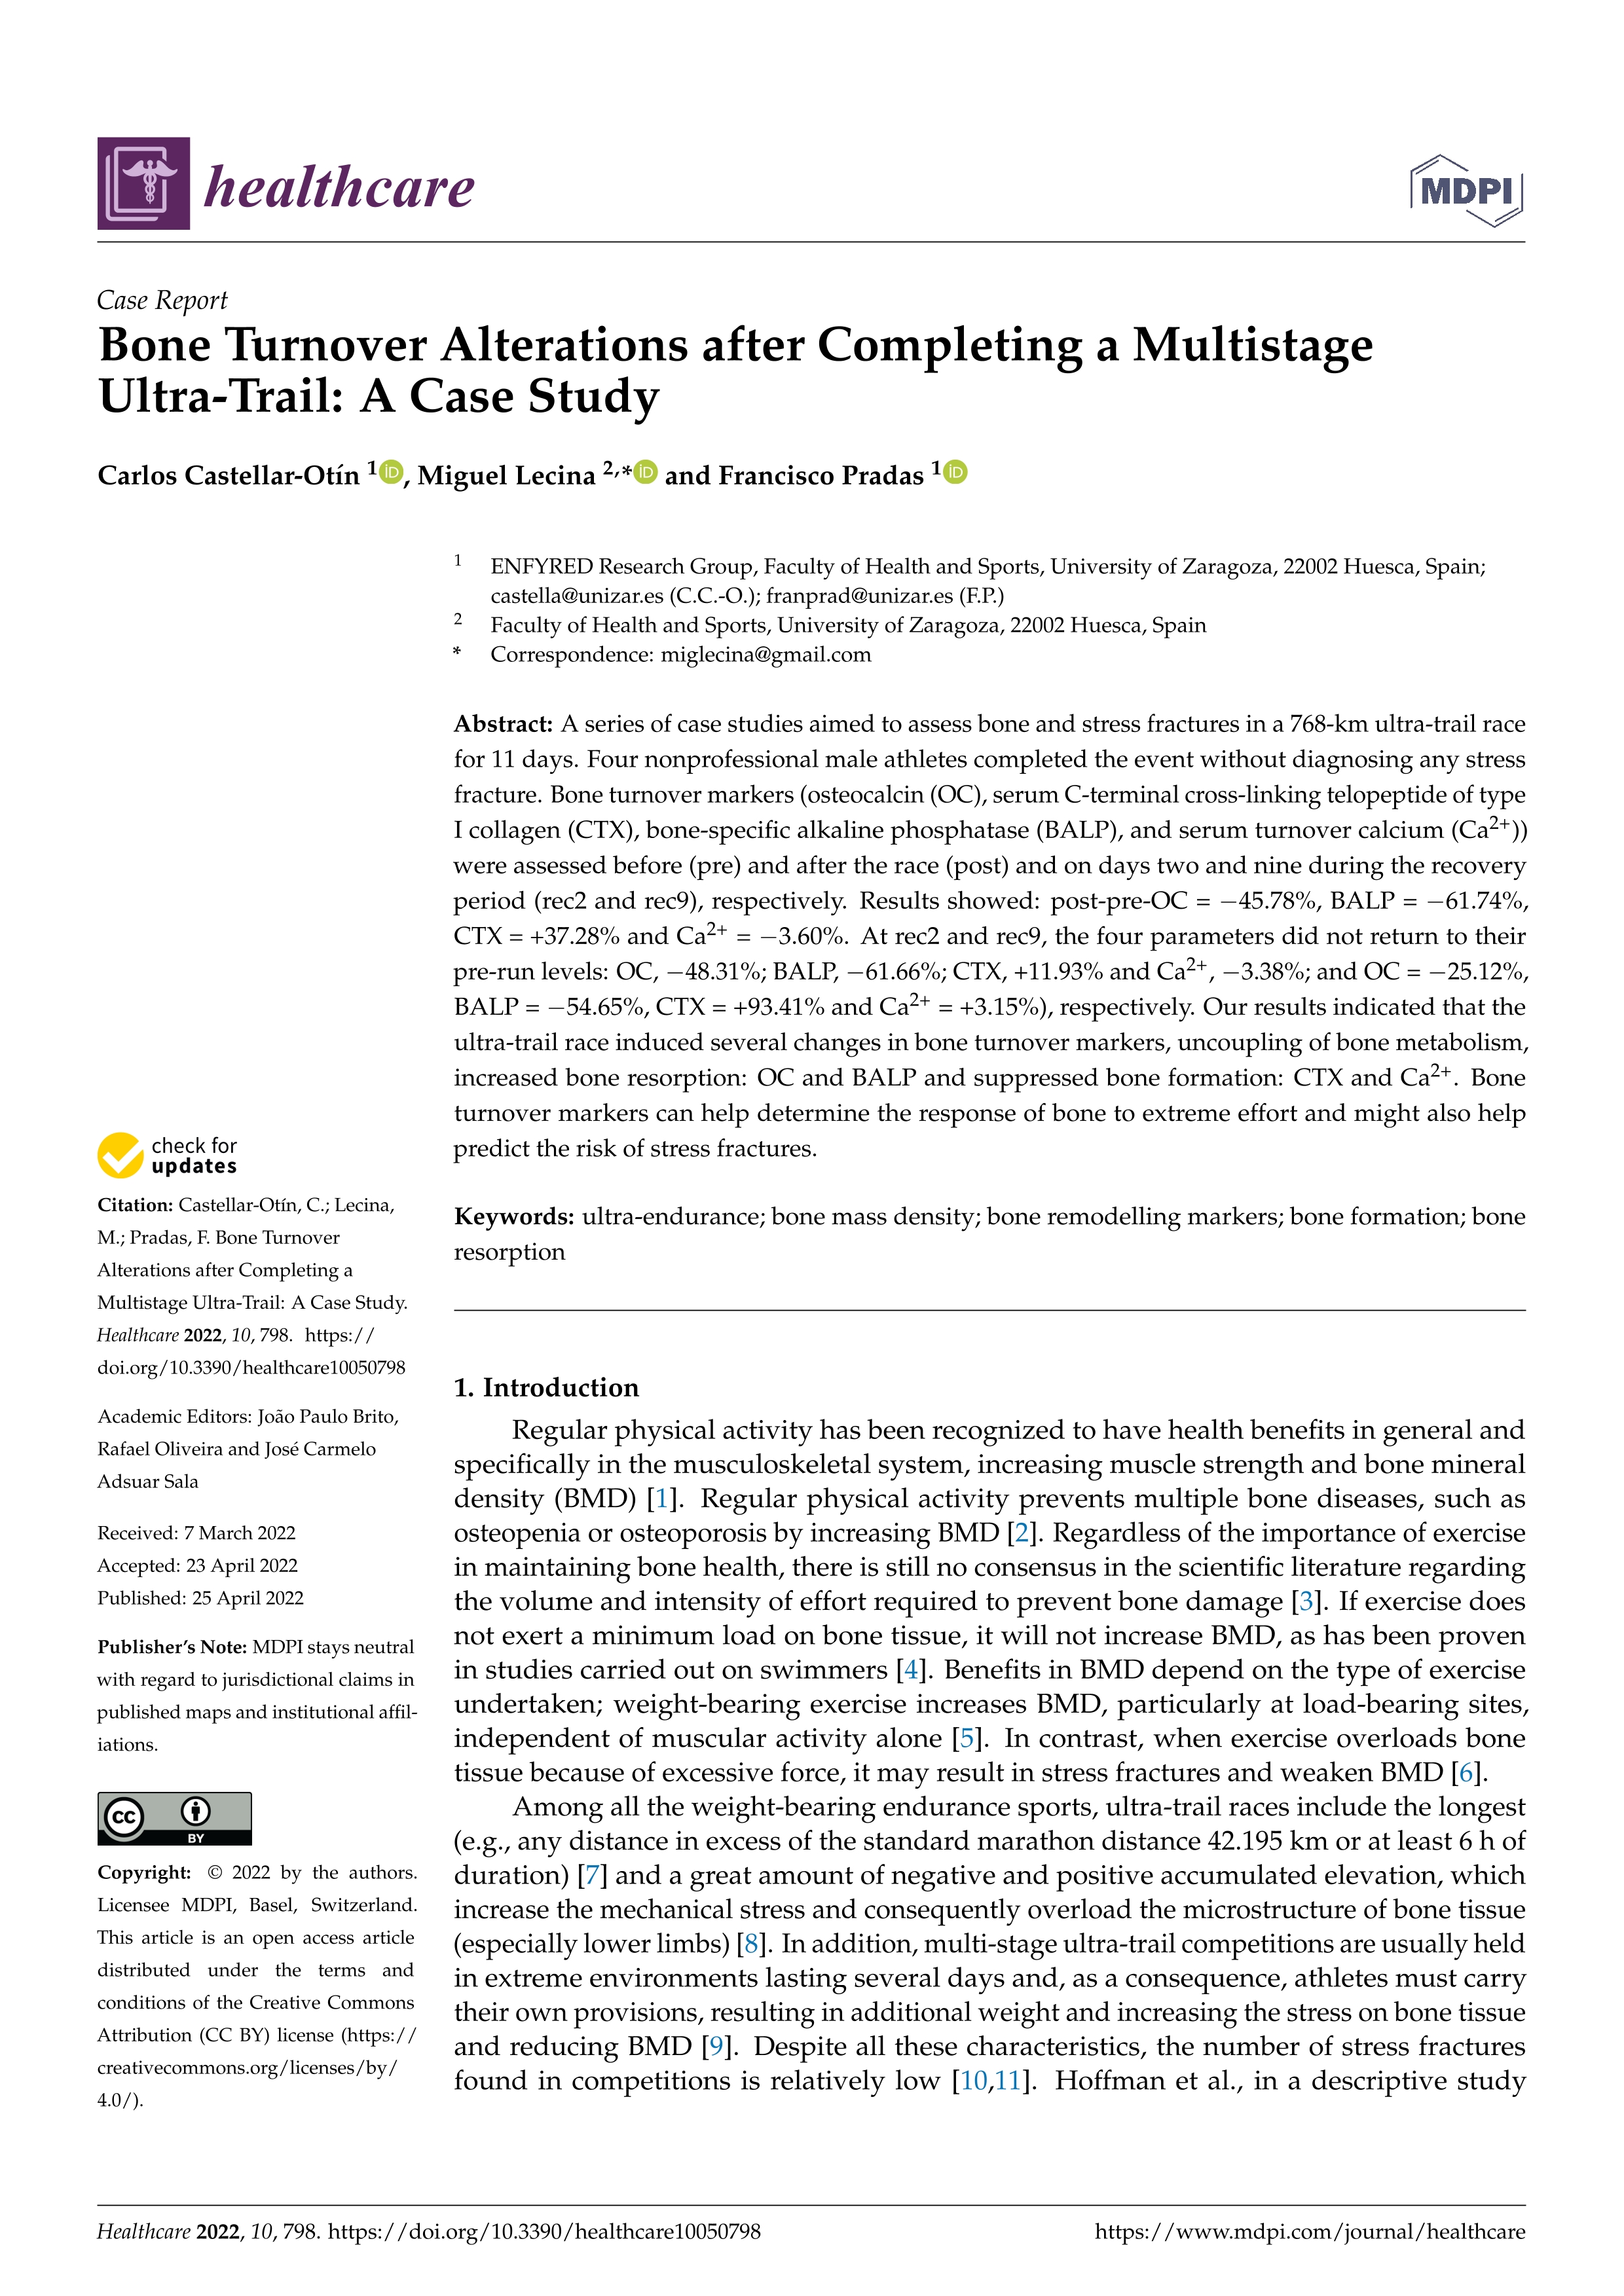 Bone turnover alterations after completing a multistage ultra-trail: a case study